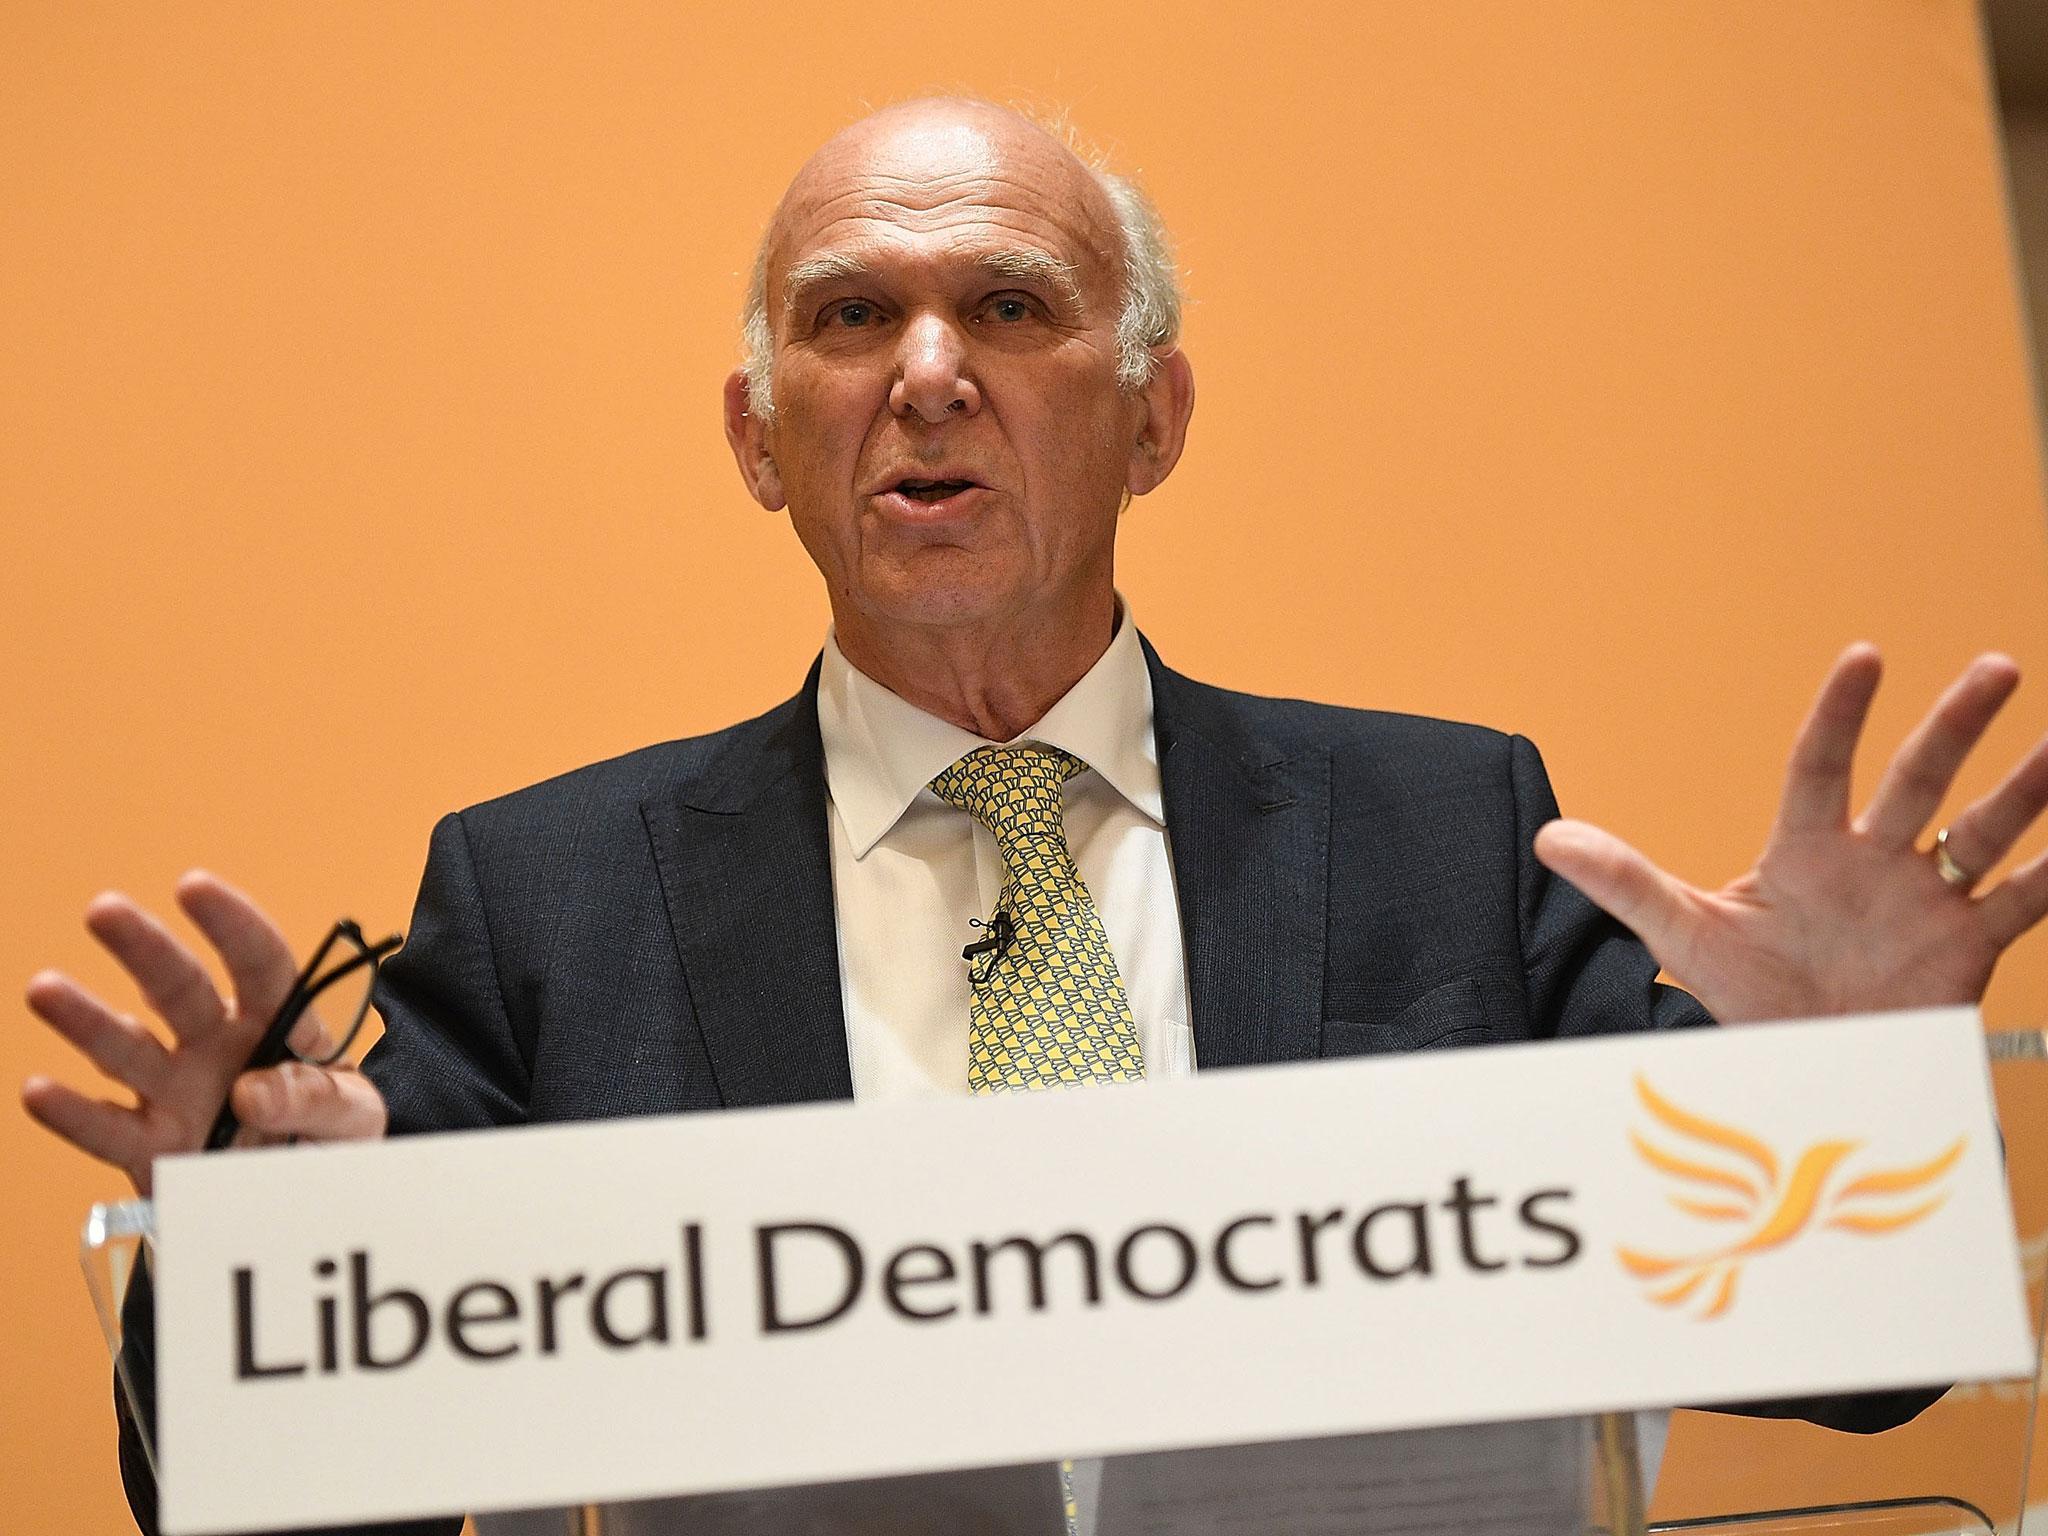 The Lib Dem leader criticised hardline Brexit 'masochists' who view economic pain as a price worth paying